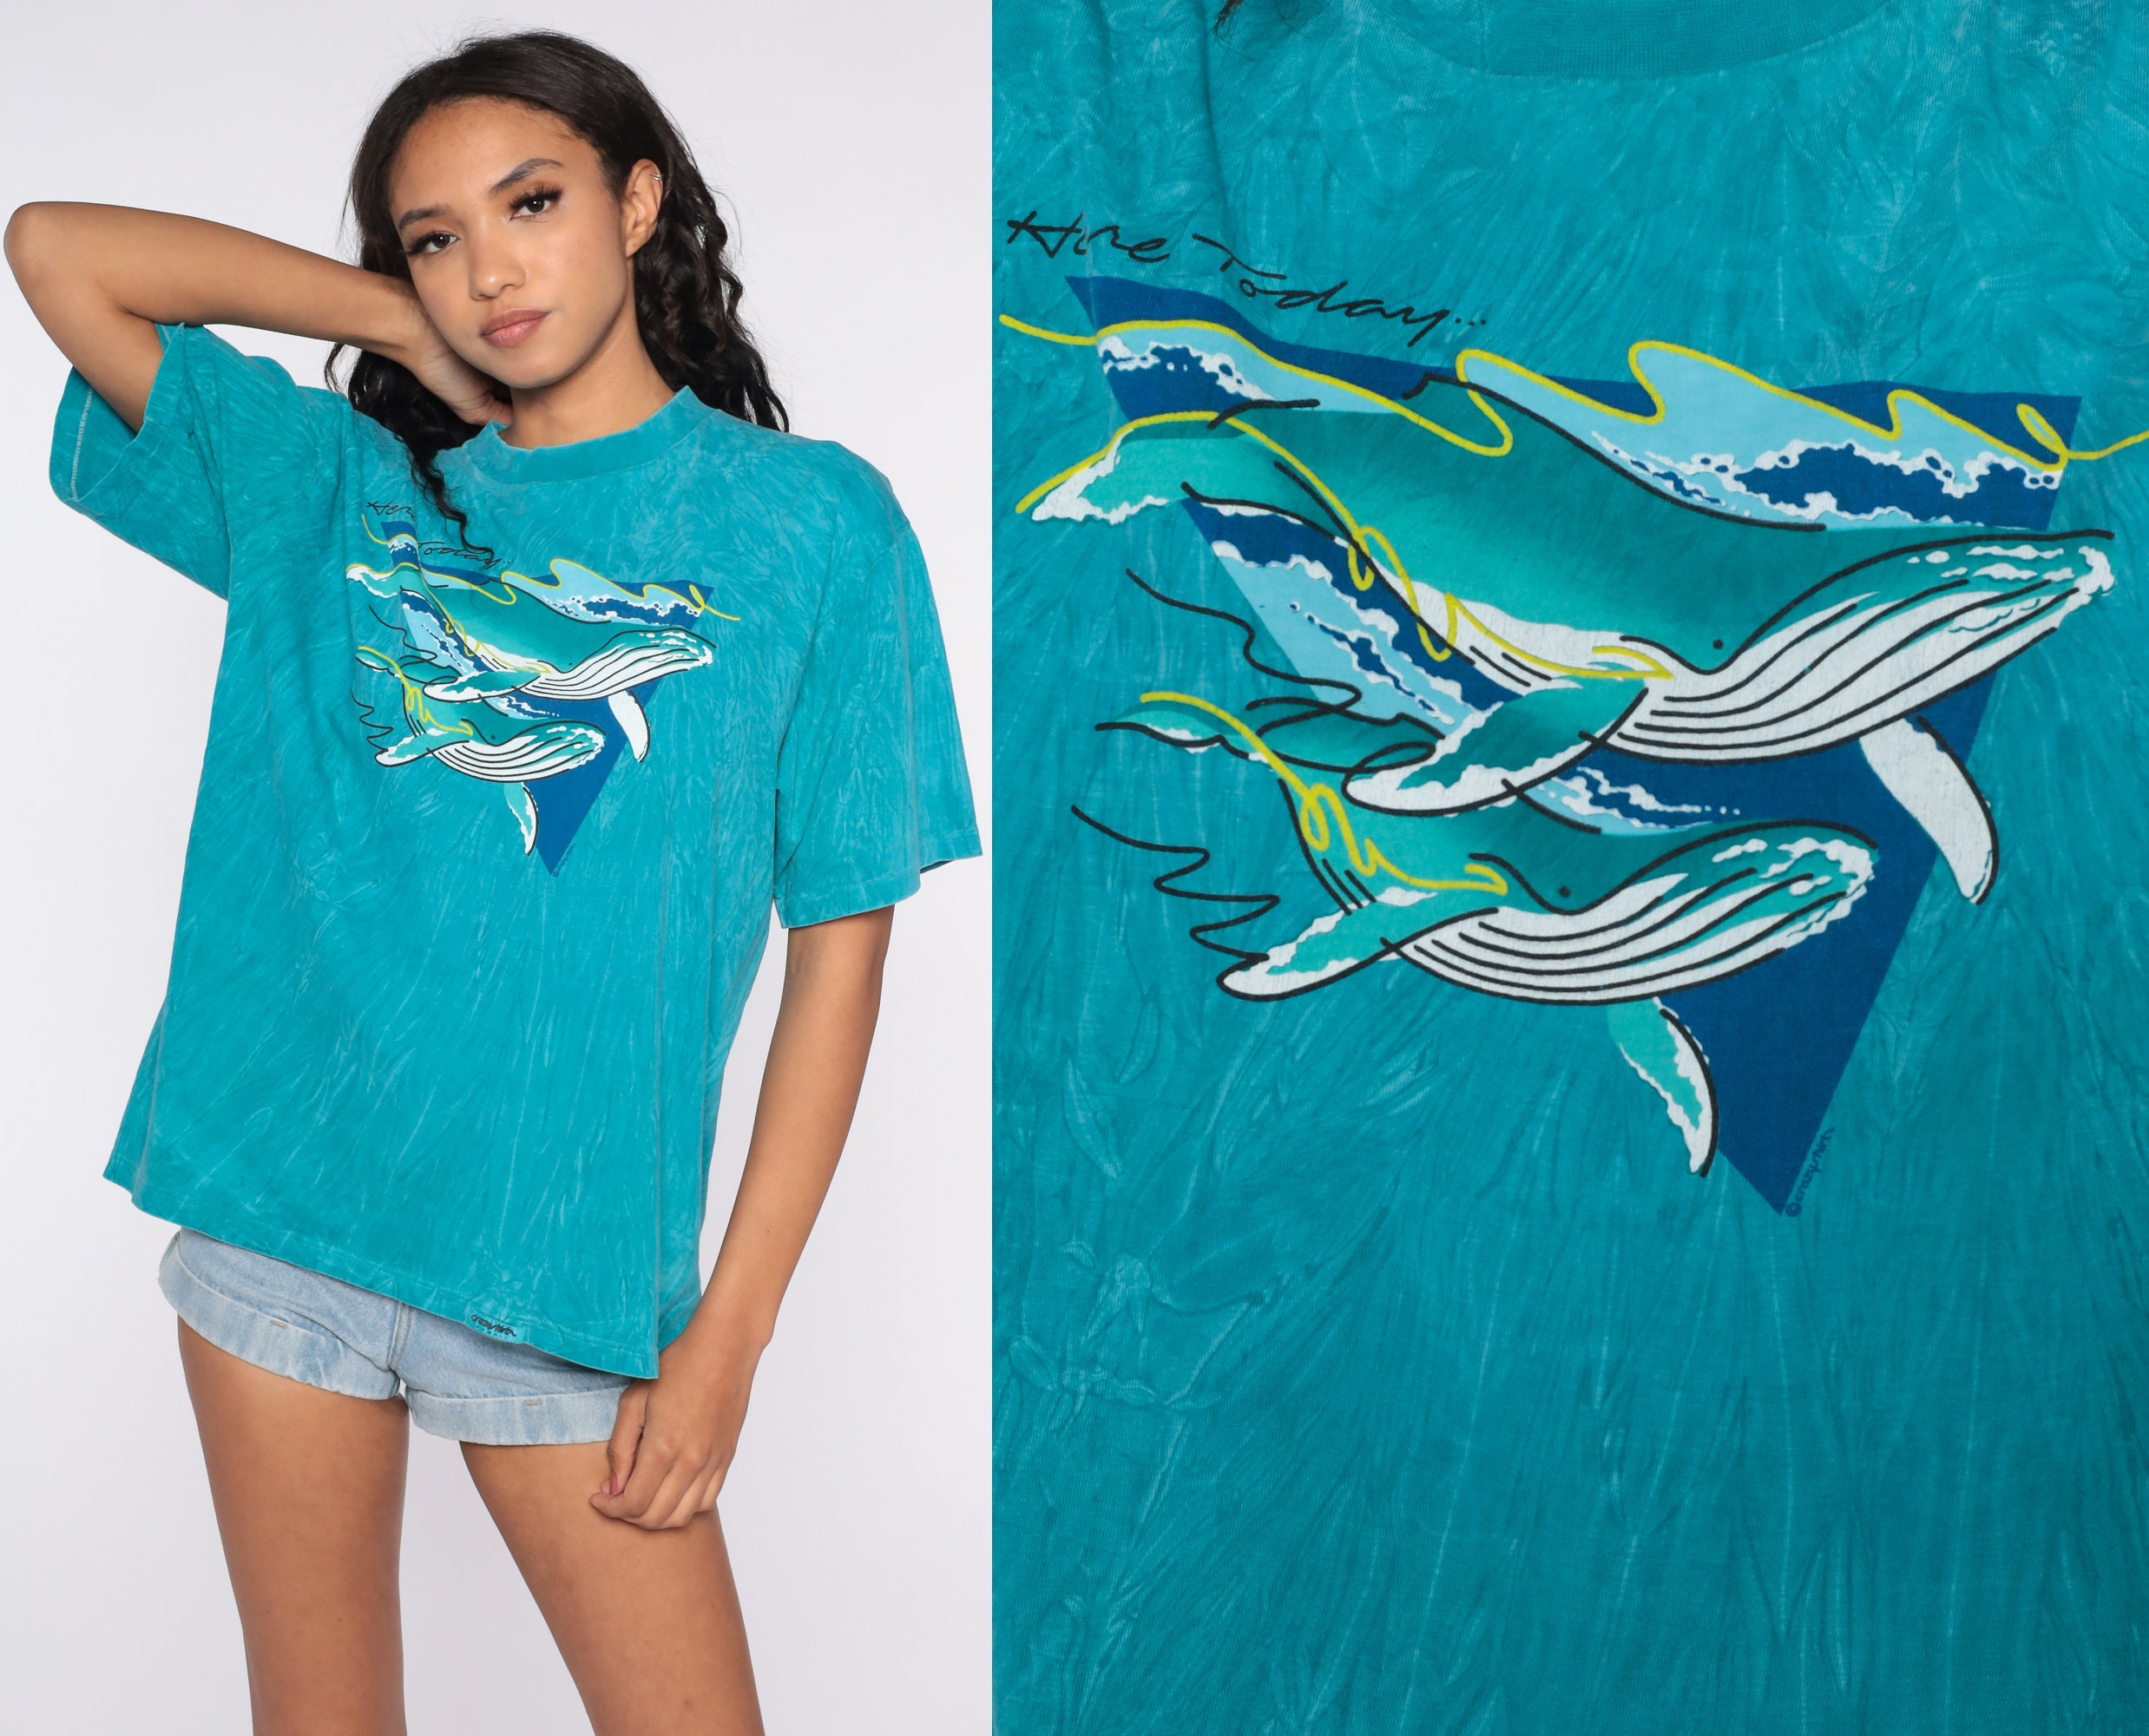 Foresee Entreprenør Kamp Maui Whale Shirt Here Today Gone To Maui 90s Crazy Shirts Tshirt Graphic  Tshirt Under The Sea Retro Tee 1990s Vintage Hawaii Large L